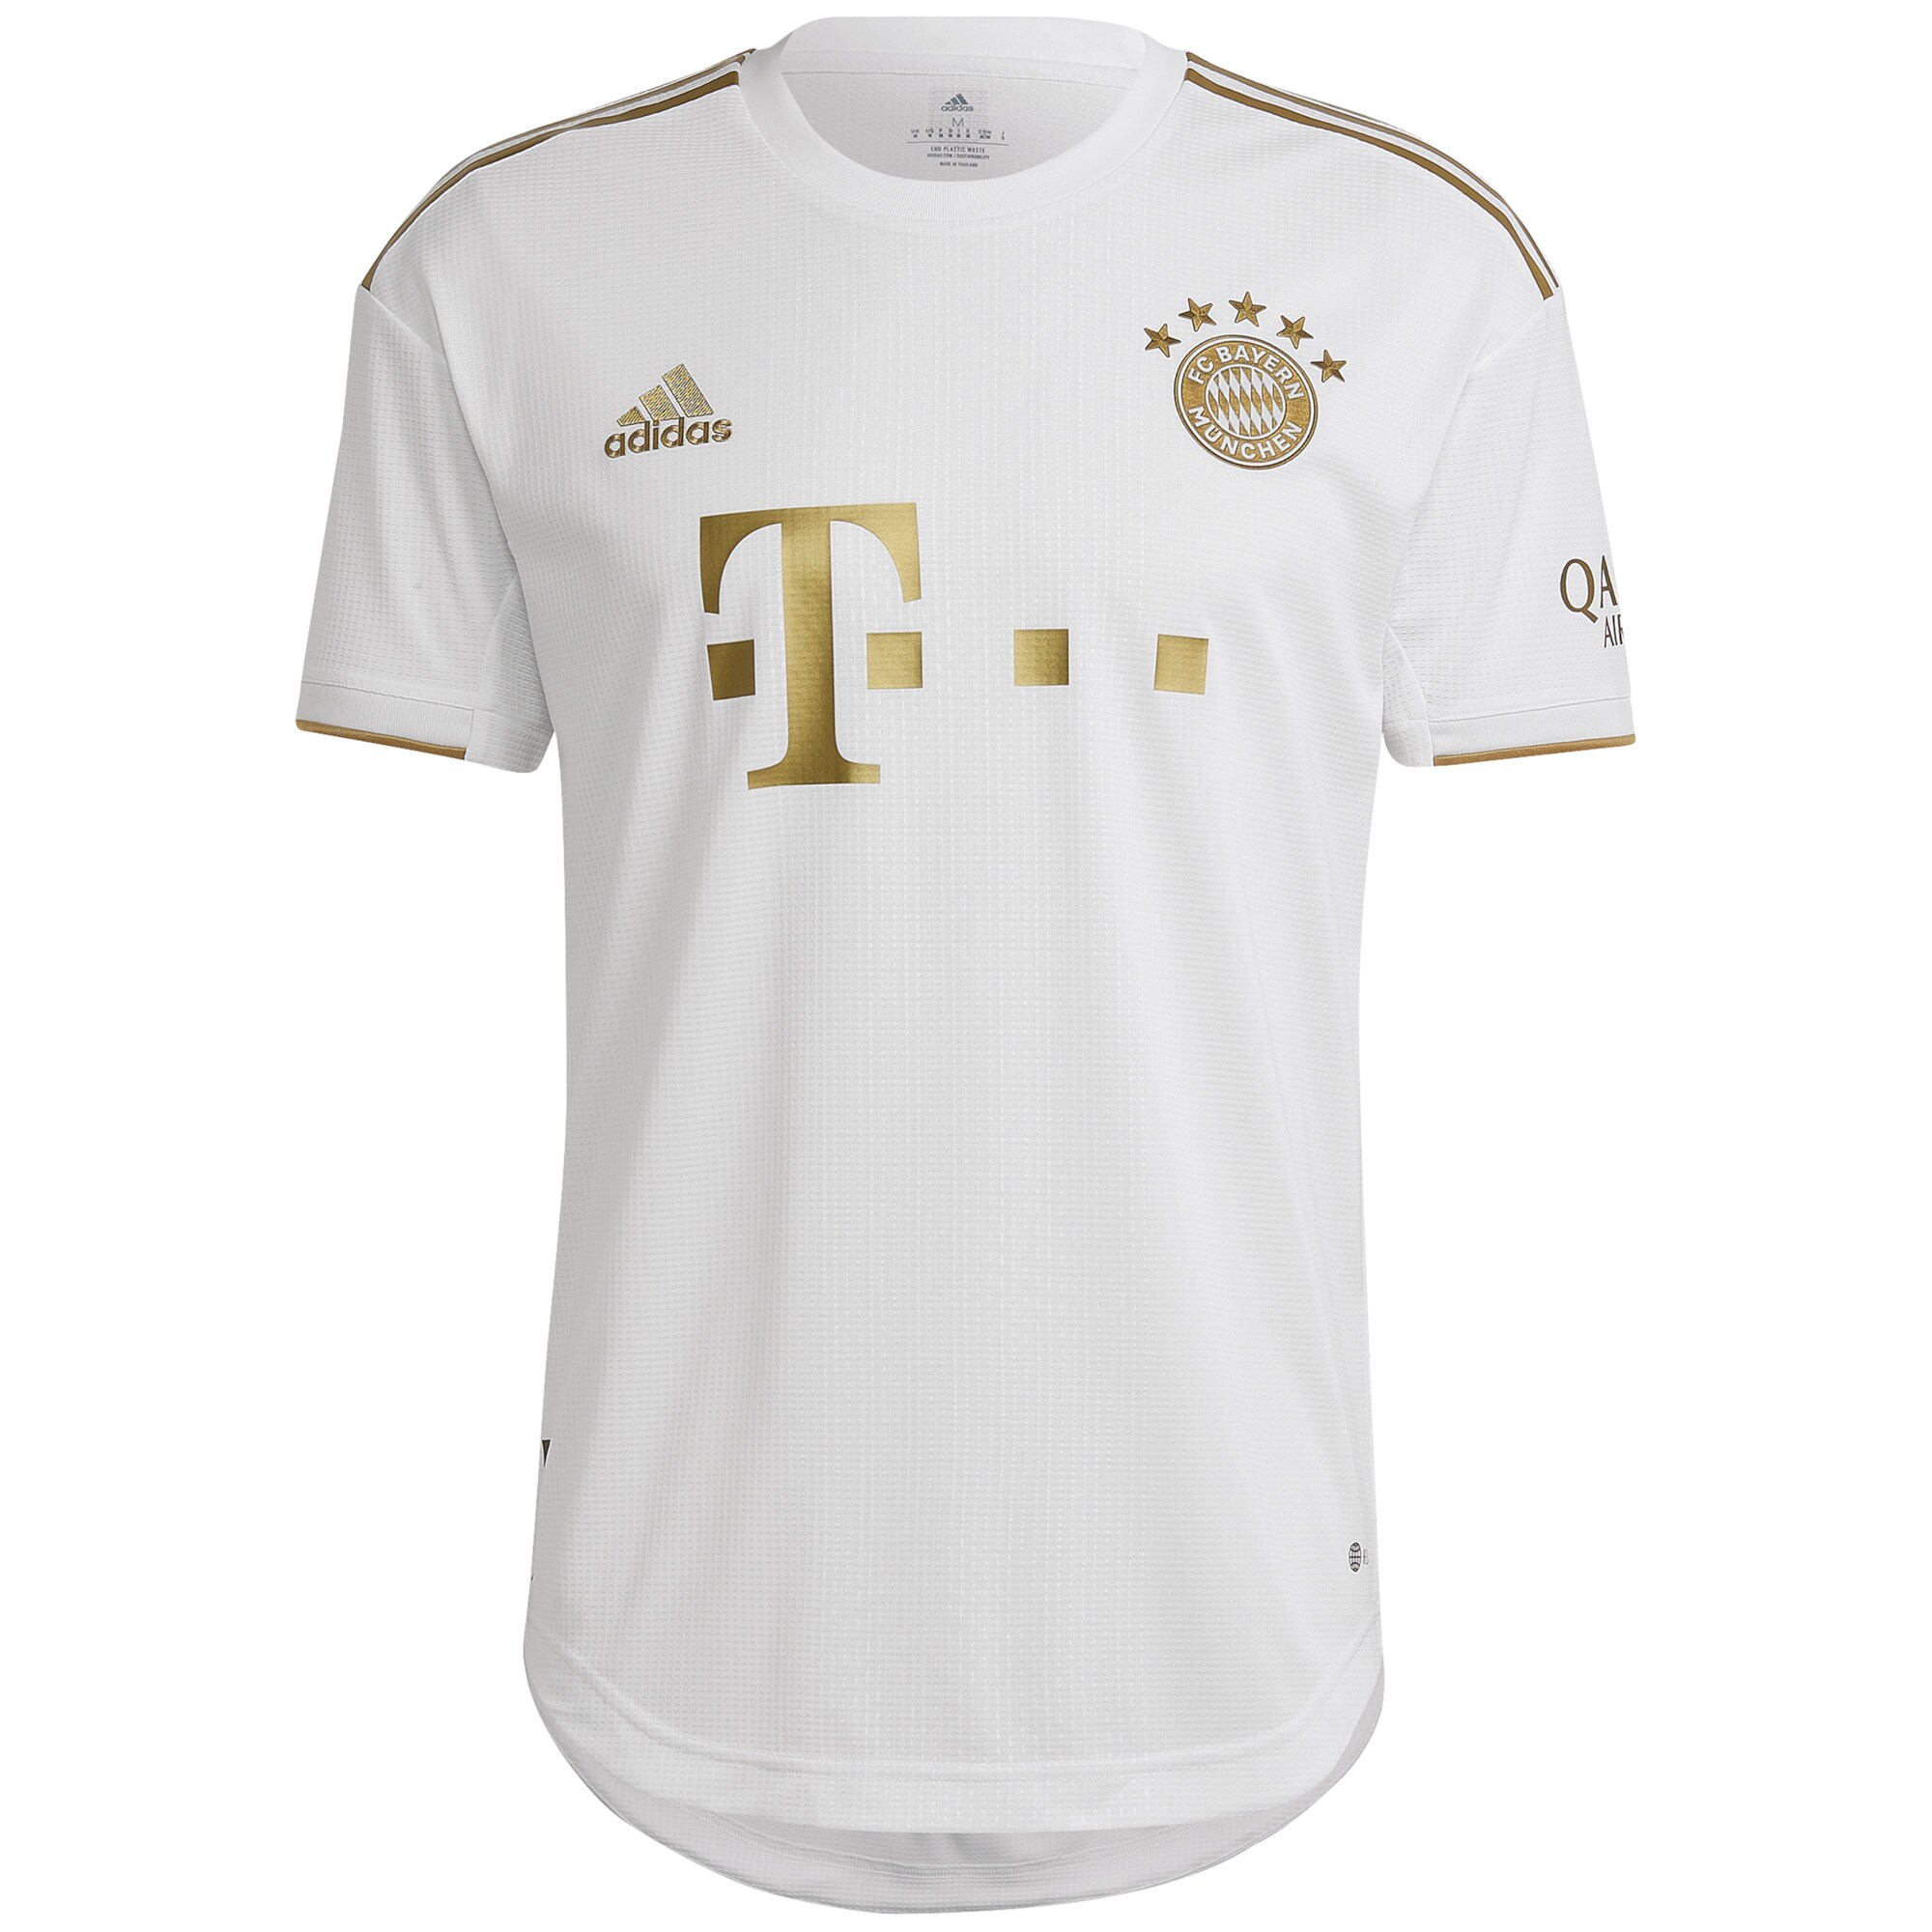 FC Bayern Away Authentic Shirt 2022-2023 with Gnabry 7 printing